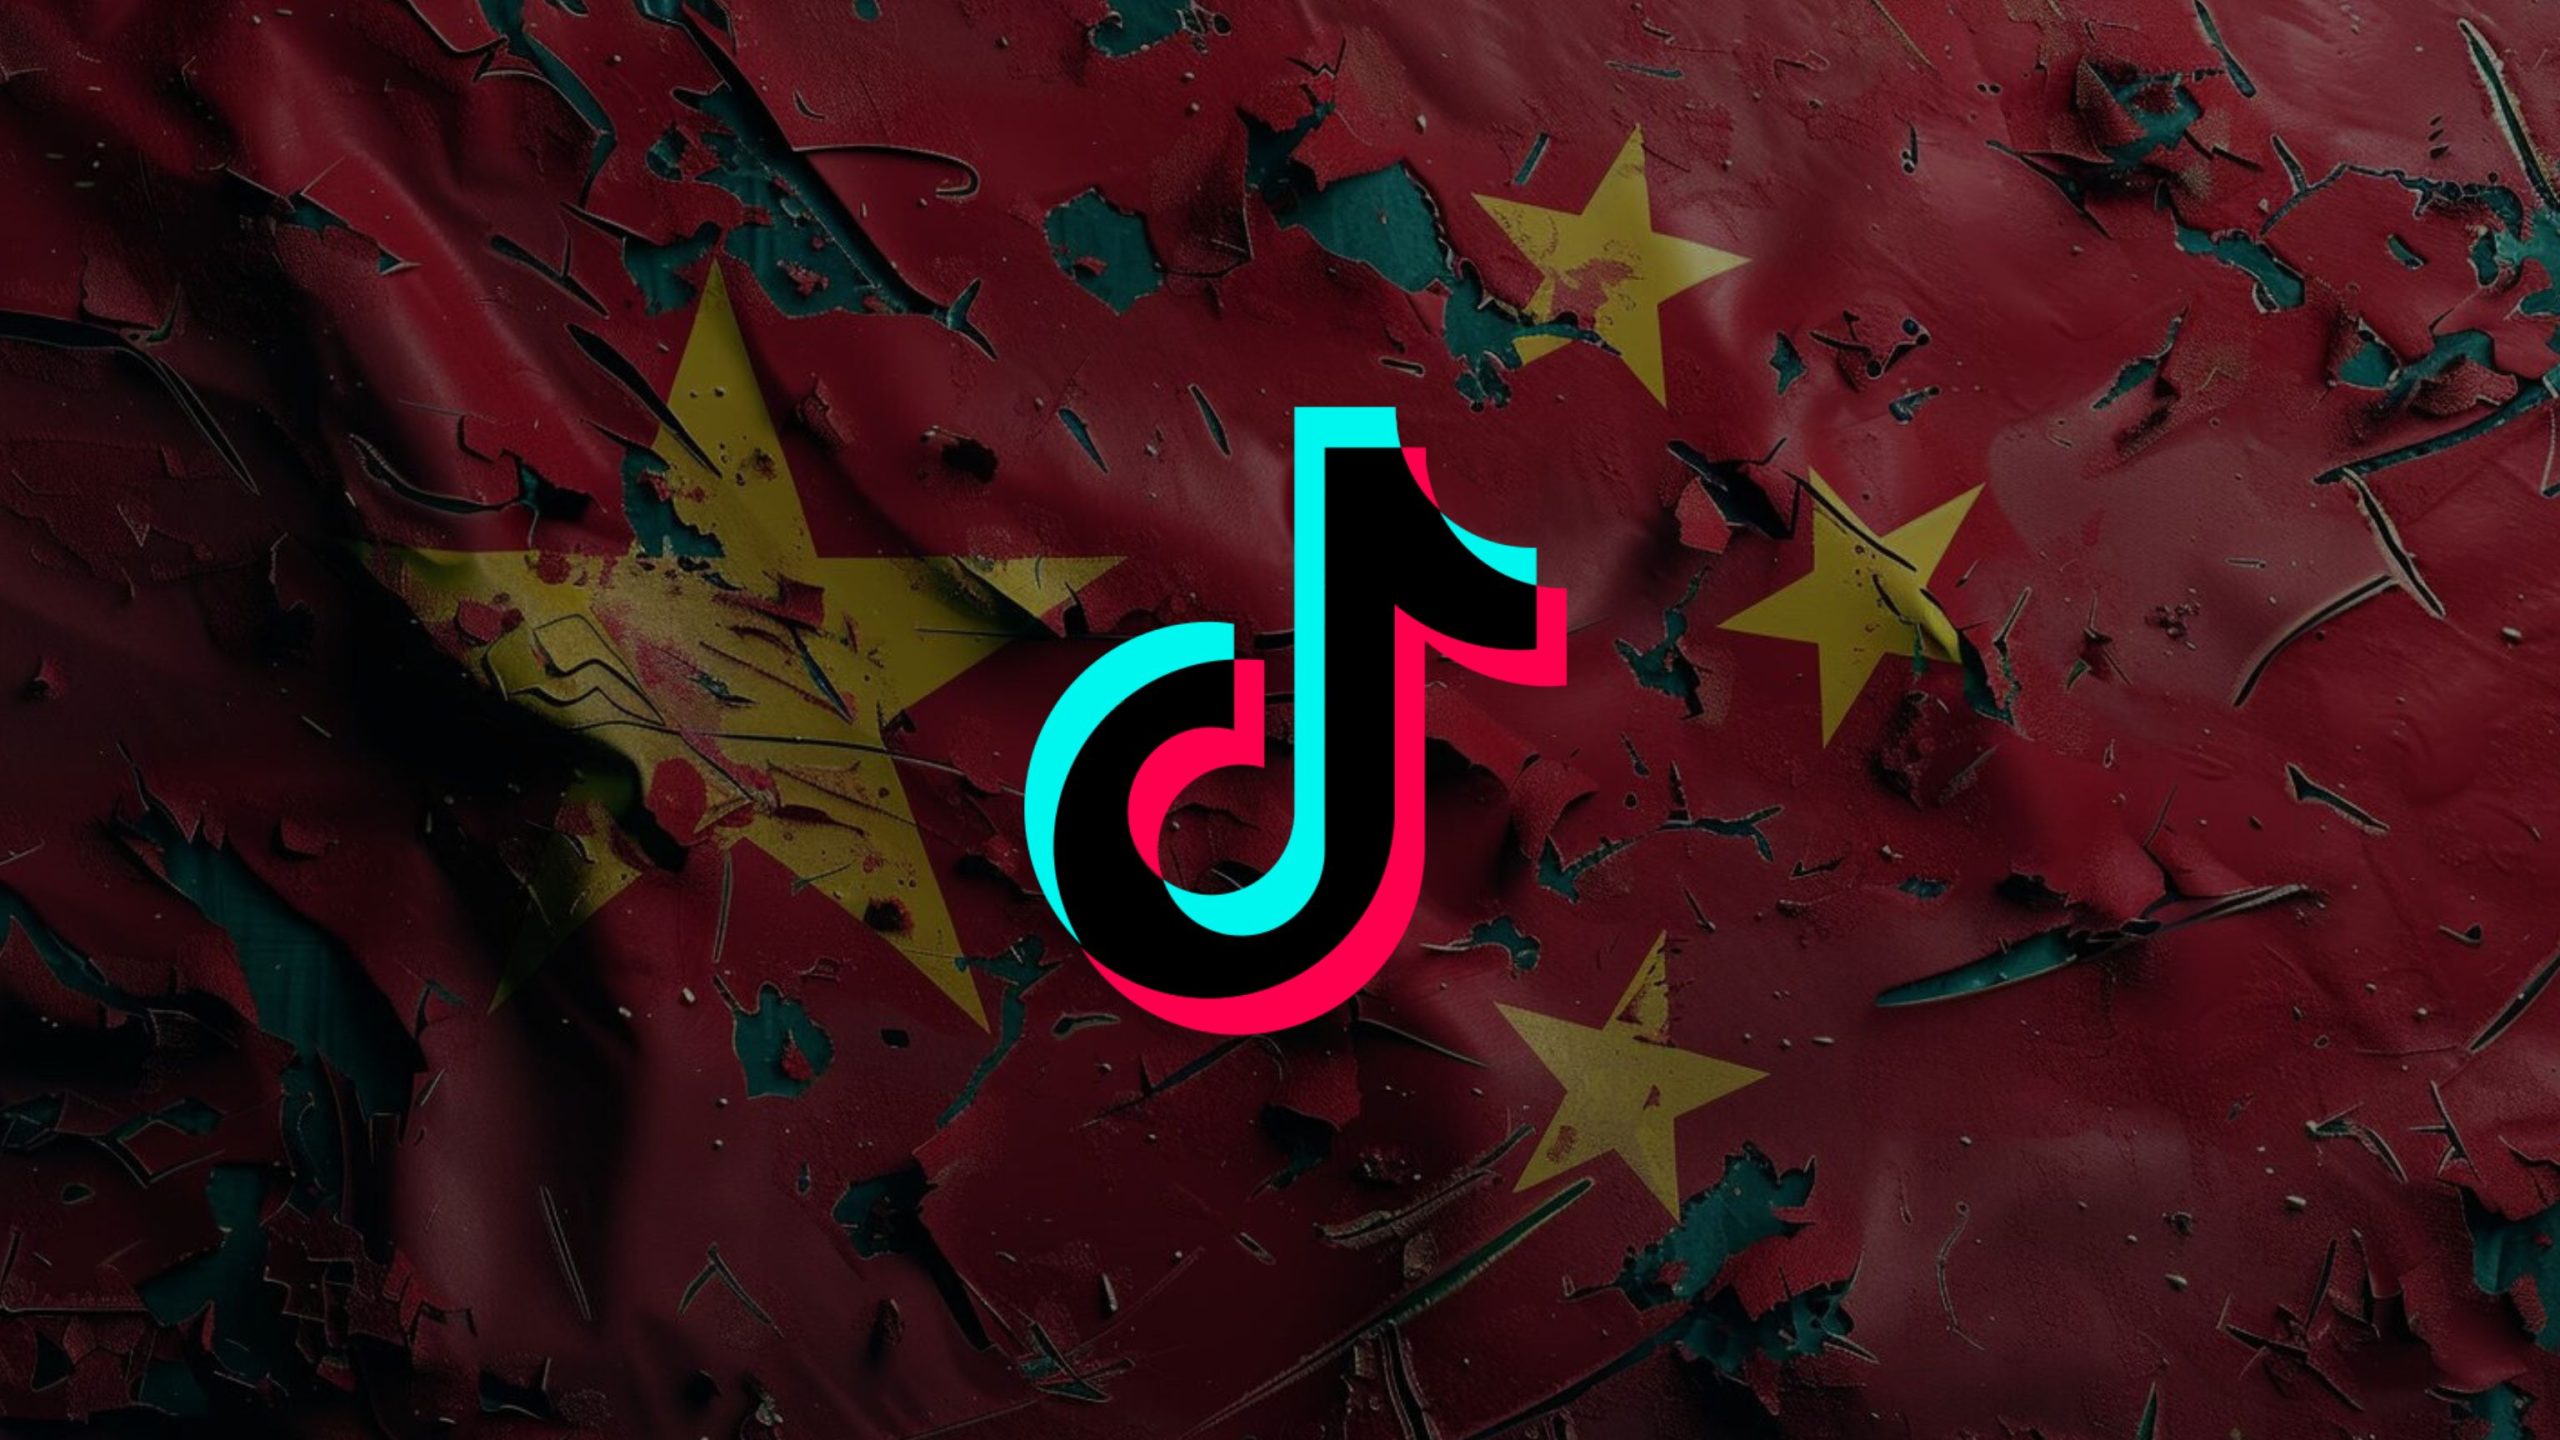 Bipartisan Bill Could Force China’s ByteDance To Sell TikTok